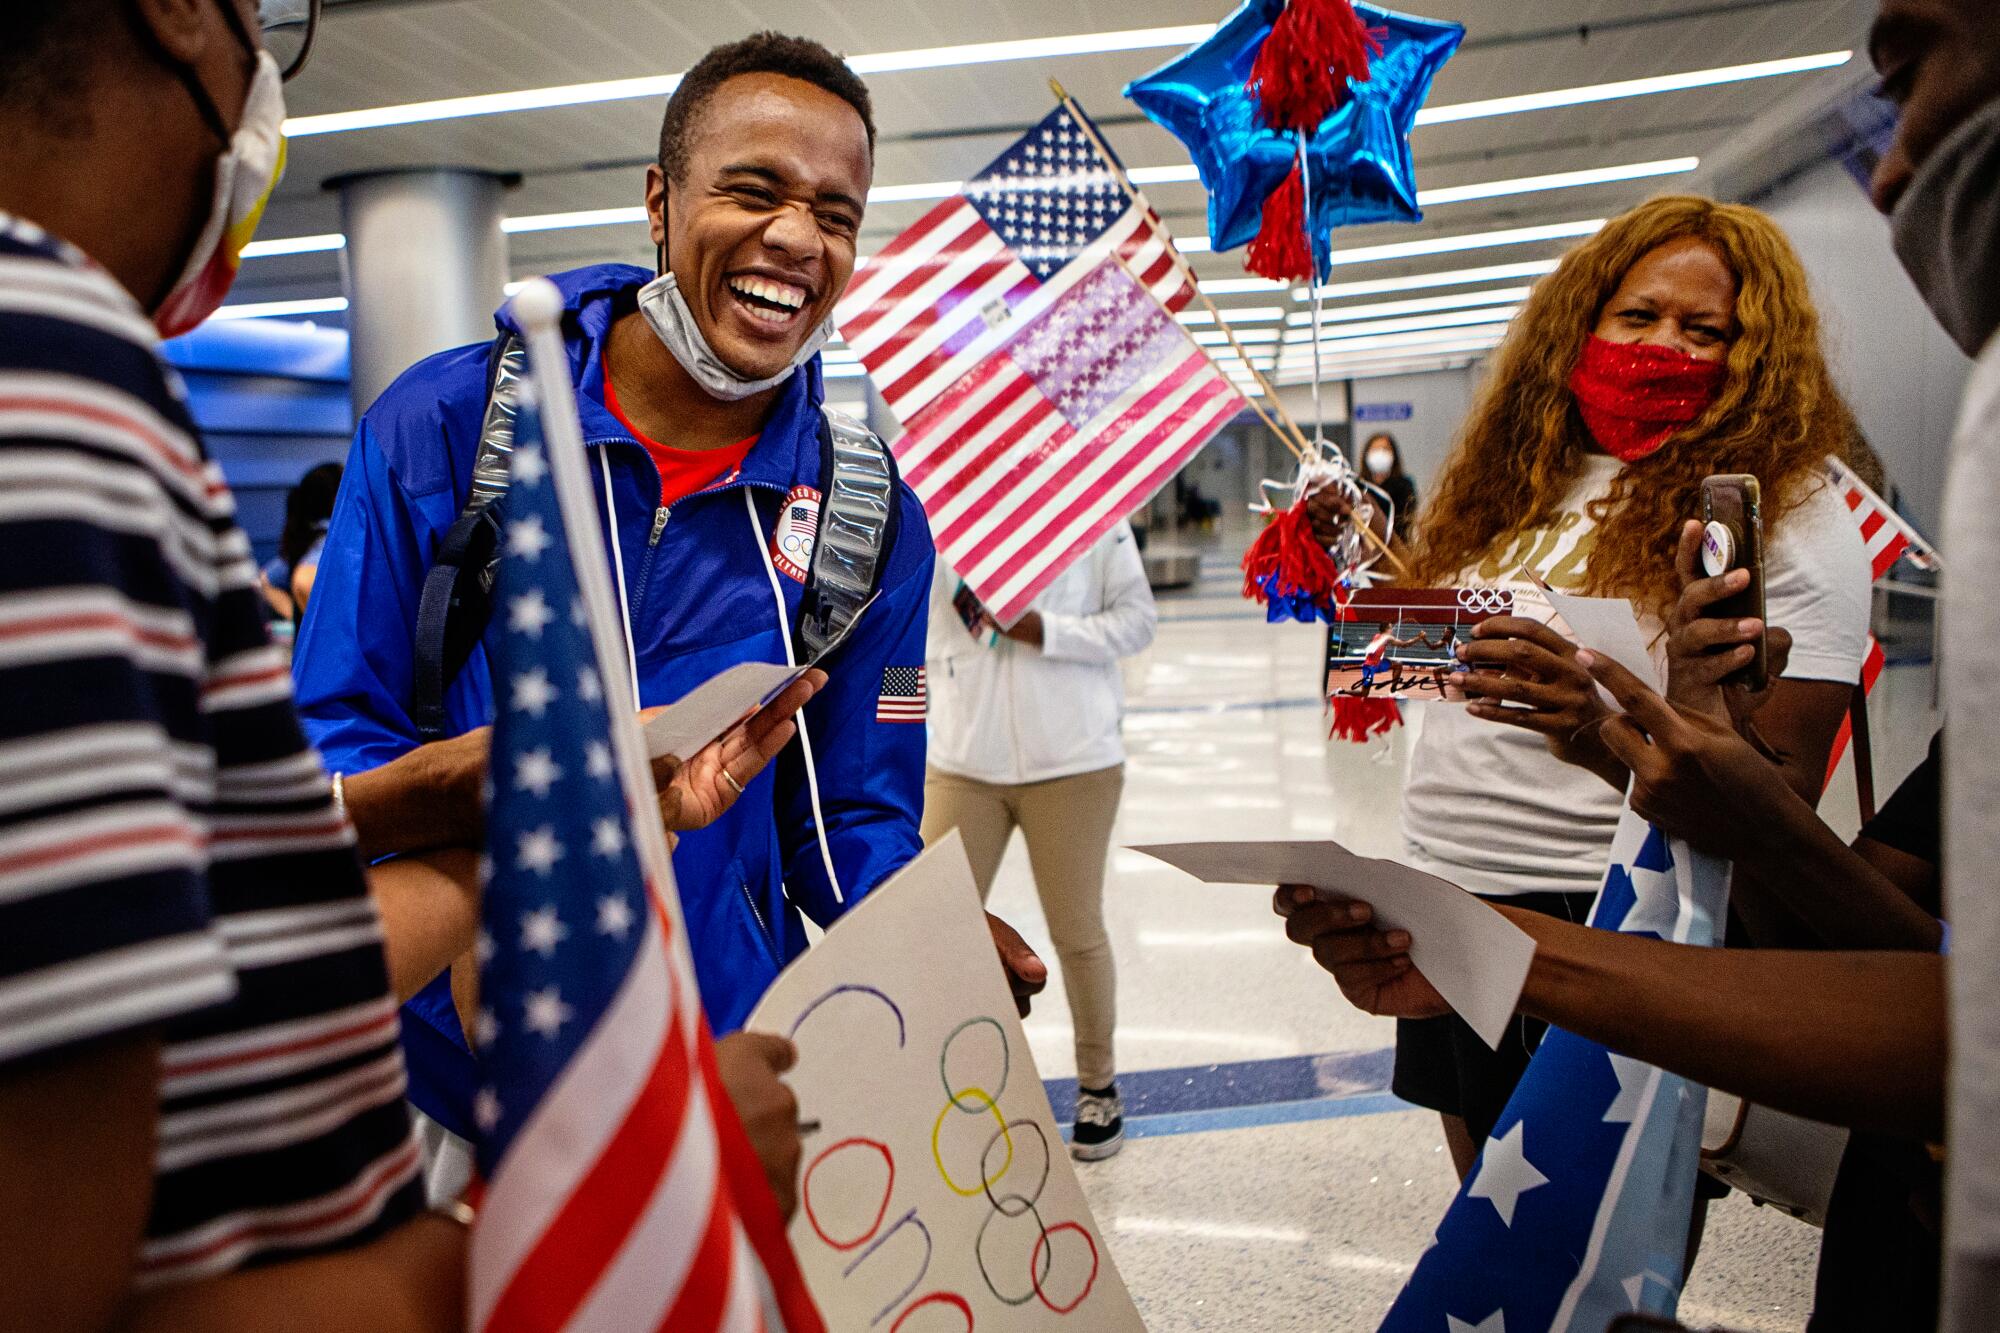 Isaiah Jewett returns from the 2021 Tokyo Olympics to a hero's welcome at LAX.